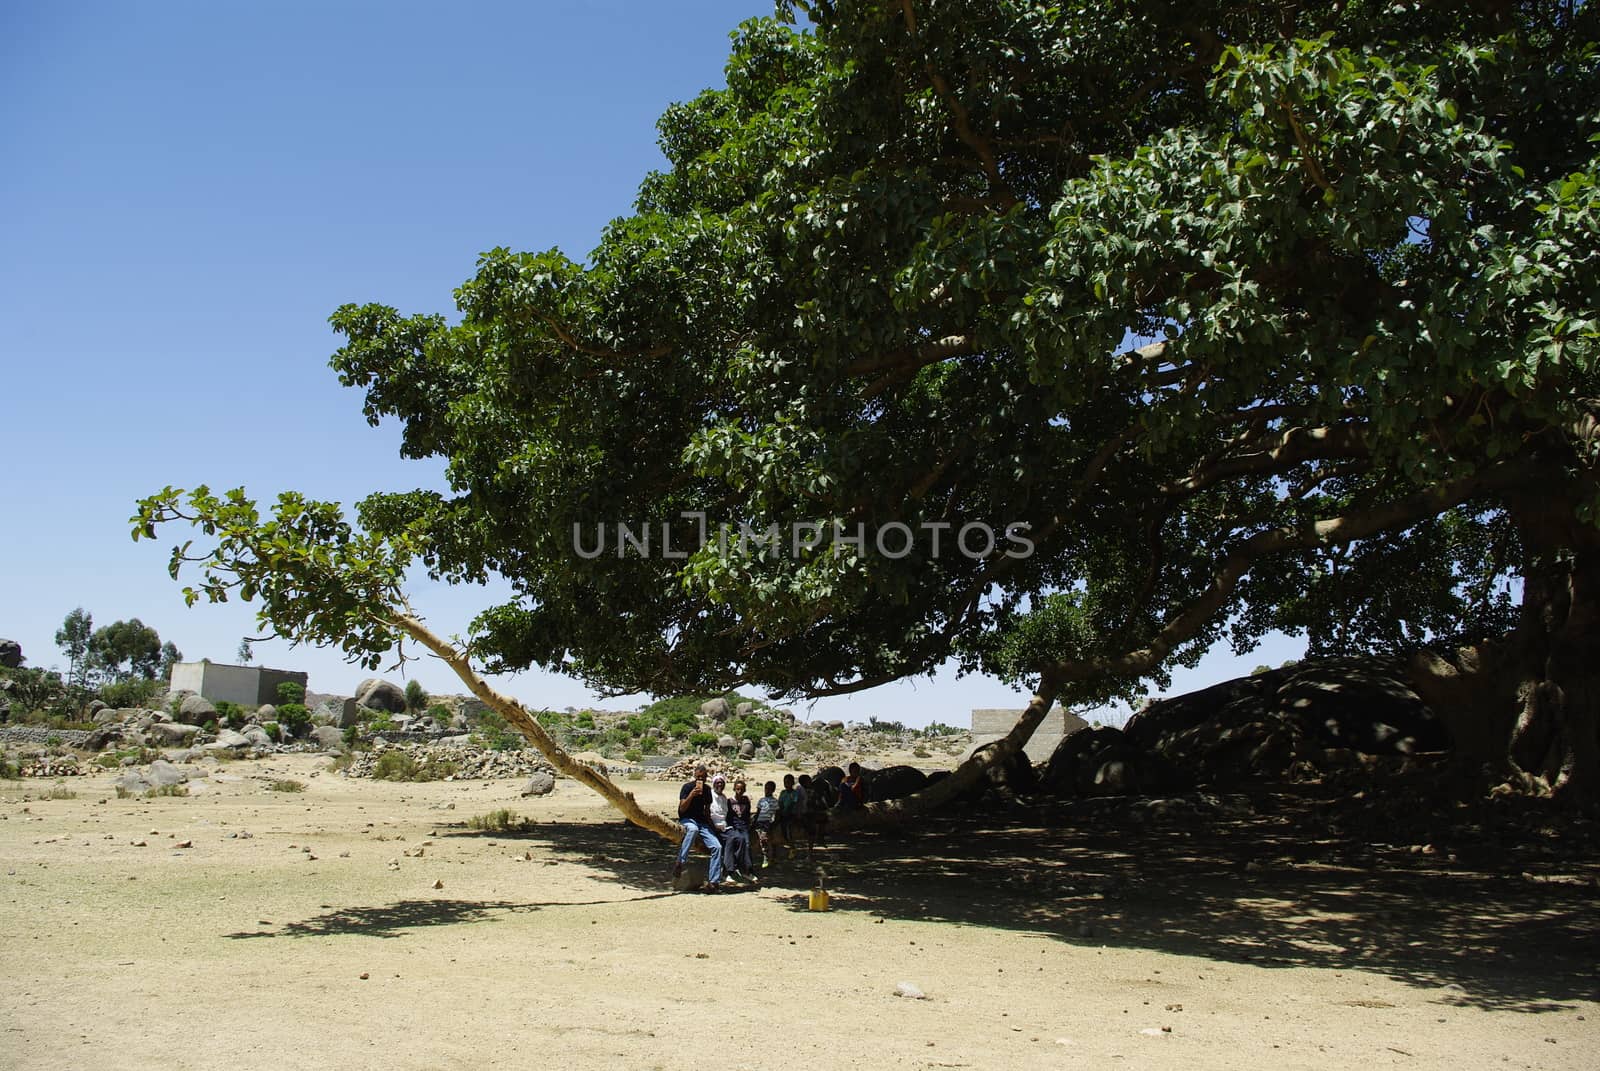 Eritrea, Africa - 08/10/2019: Travelling around the vilages near Asmara and Massawa. An amazing caption of the trees, mountains and some old typical houses with very hot climate in Eritrea.